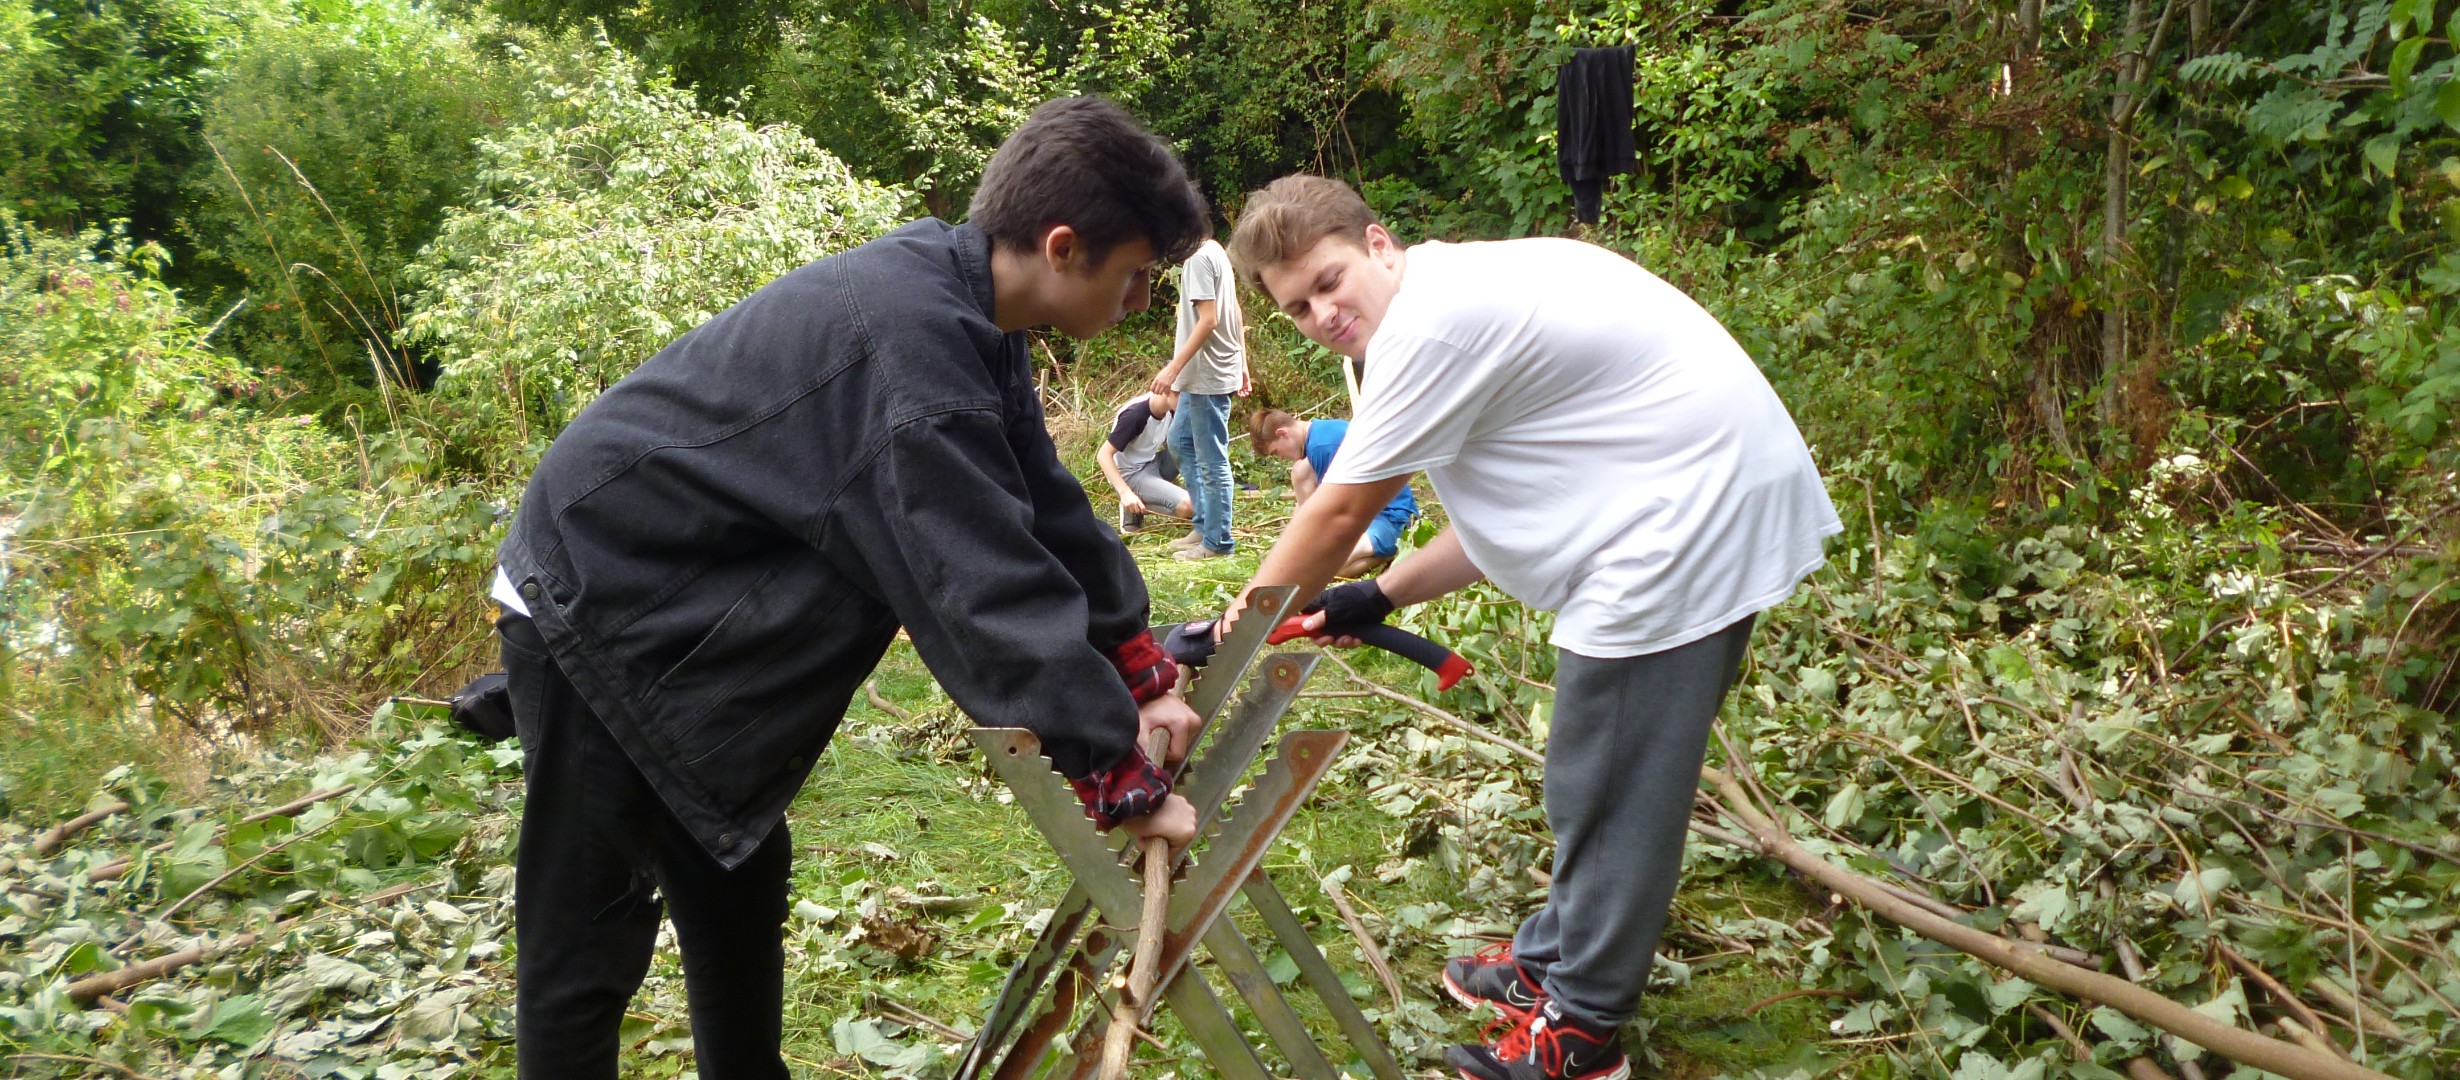 Two young people are holding a thin tree trunk on a metal structure in a woodland clearing